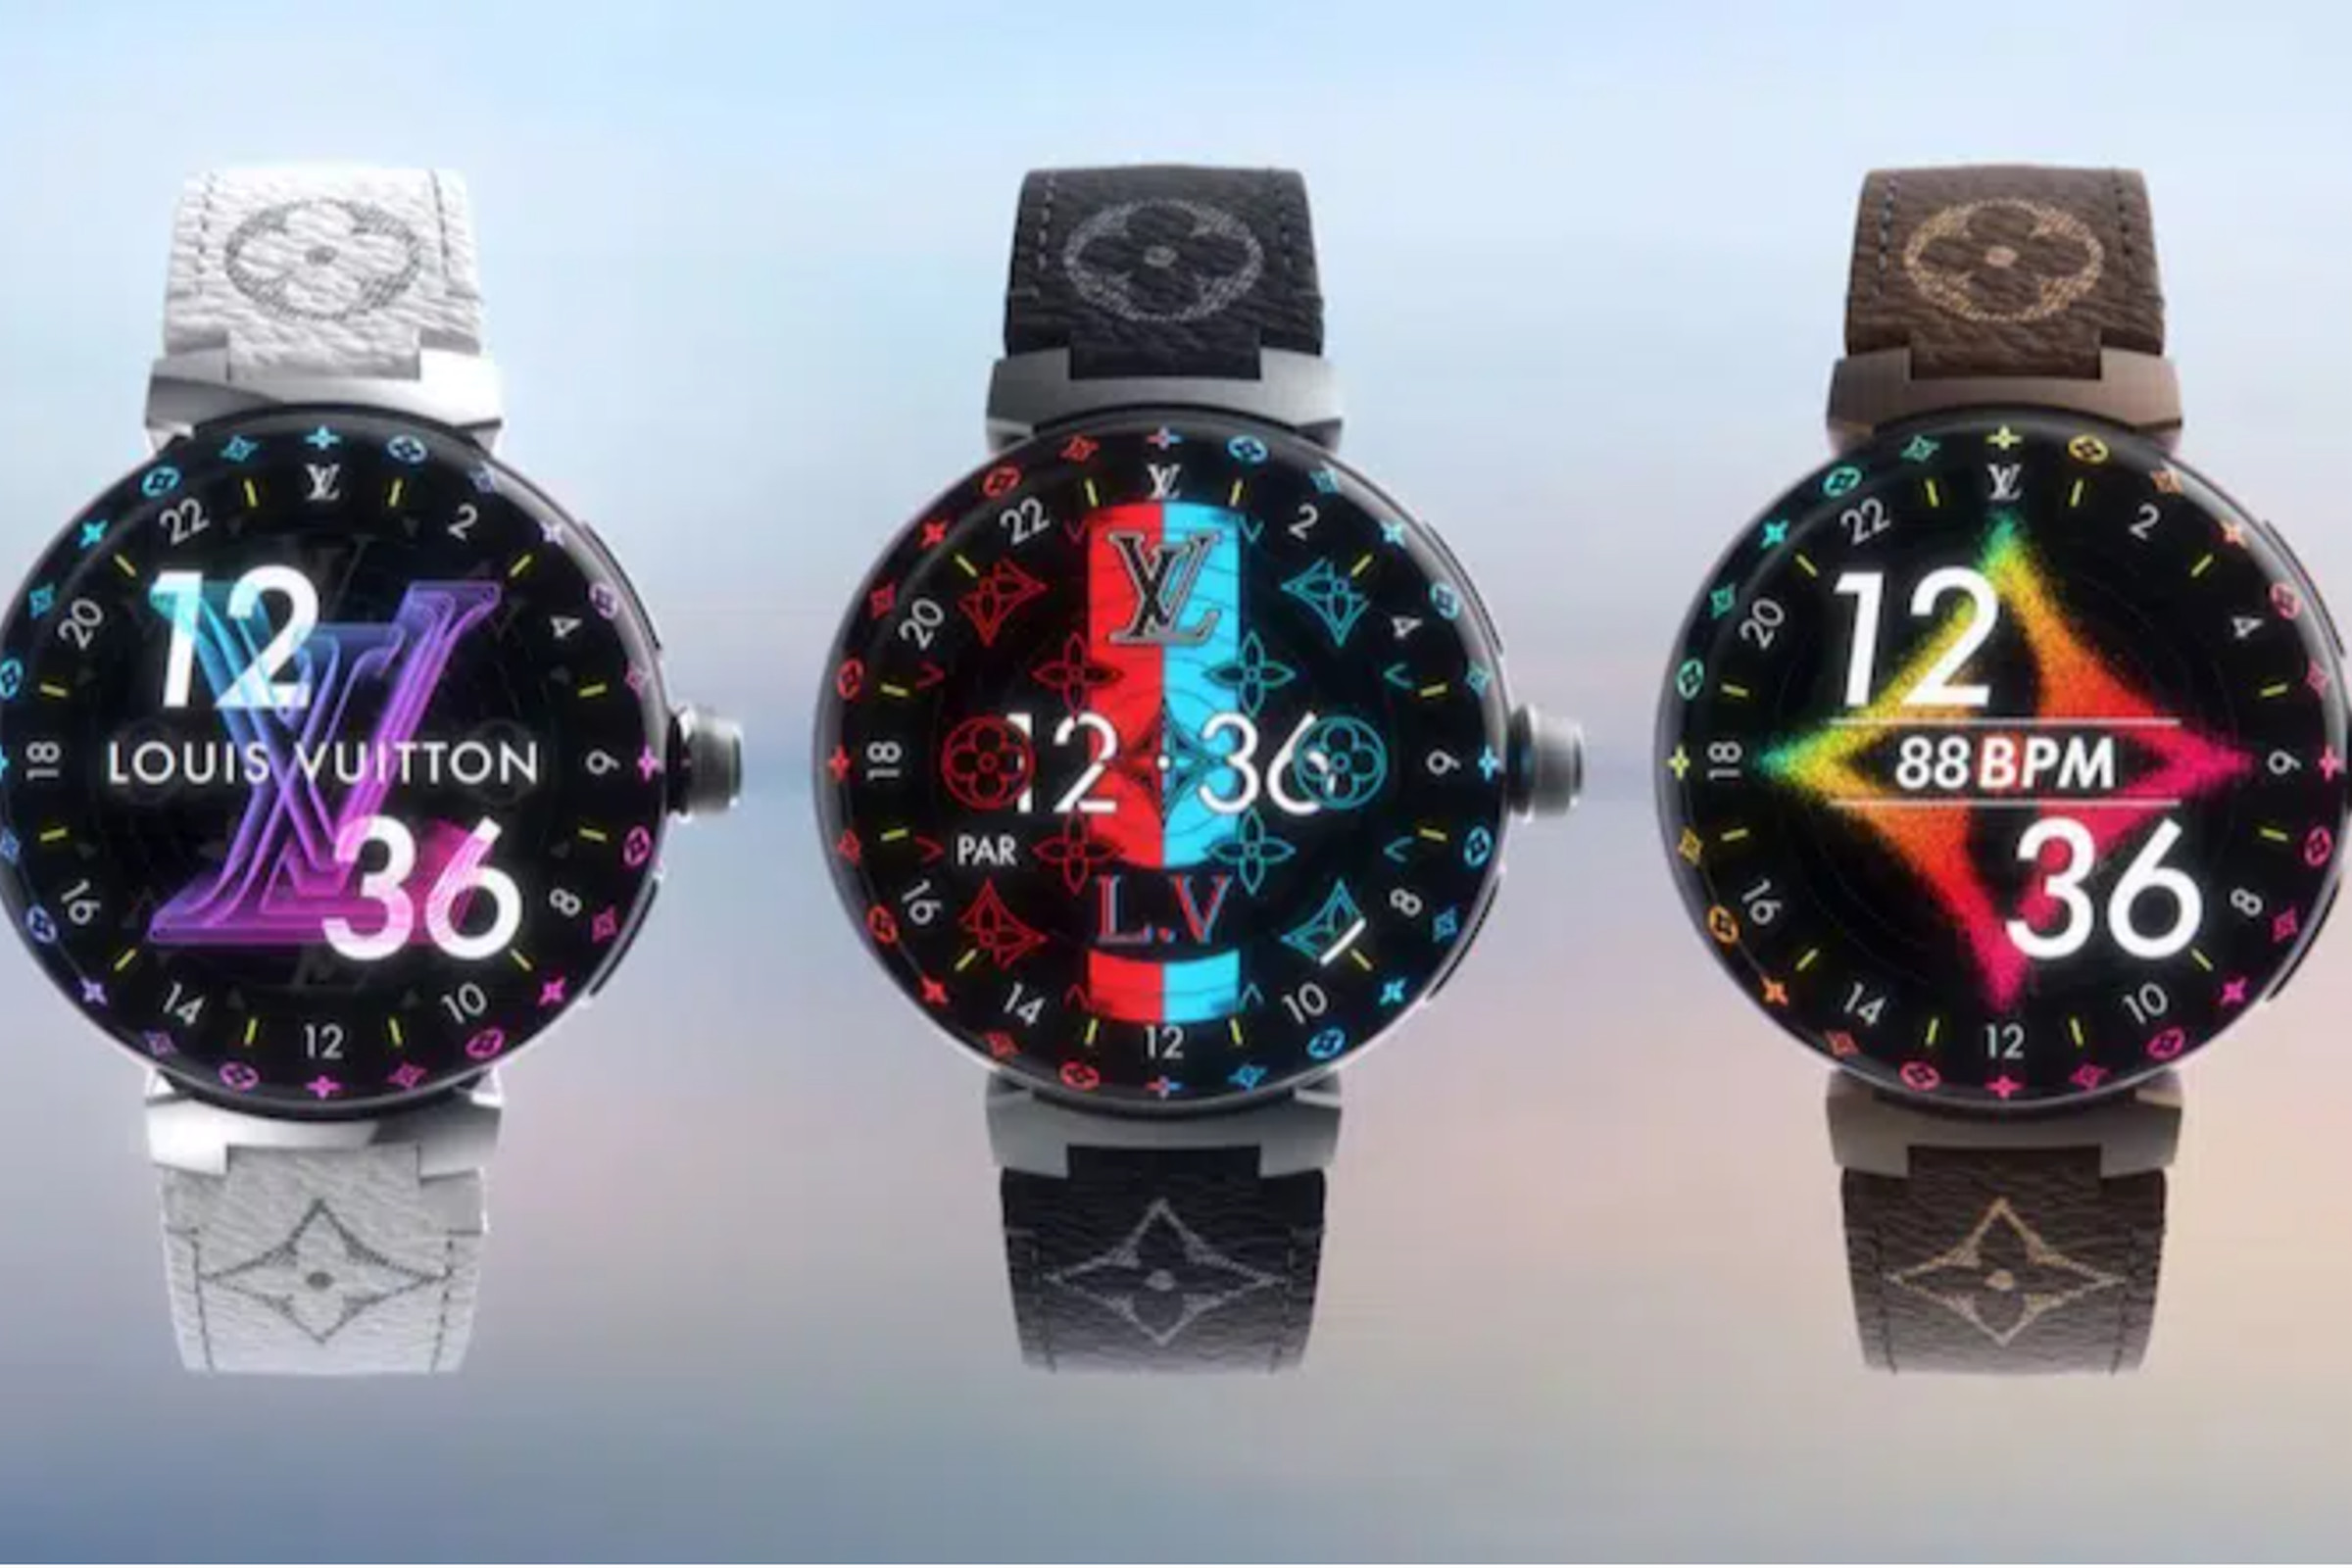 Leaked images of the rumored new Louis Vuitton watch